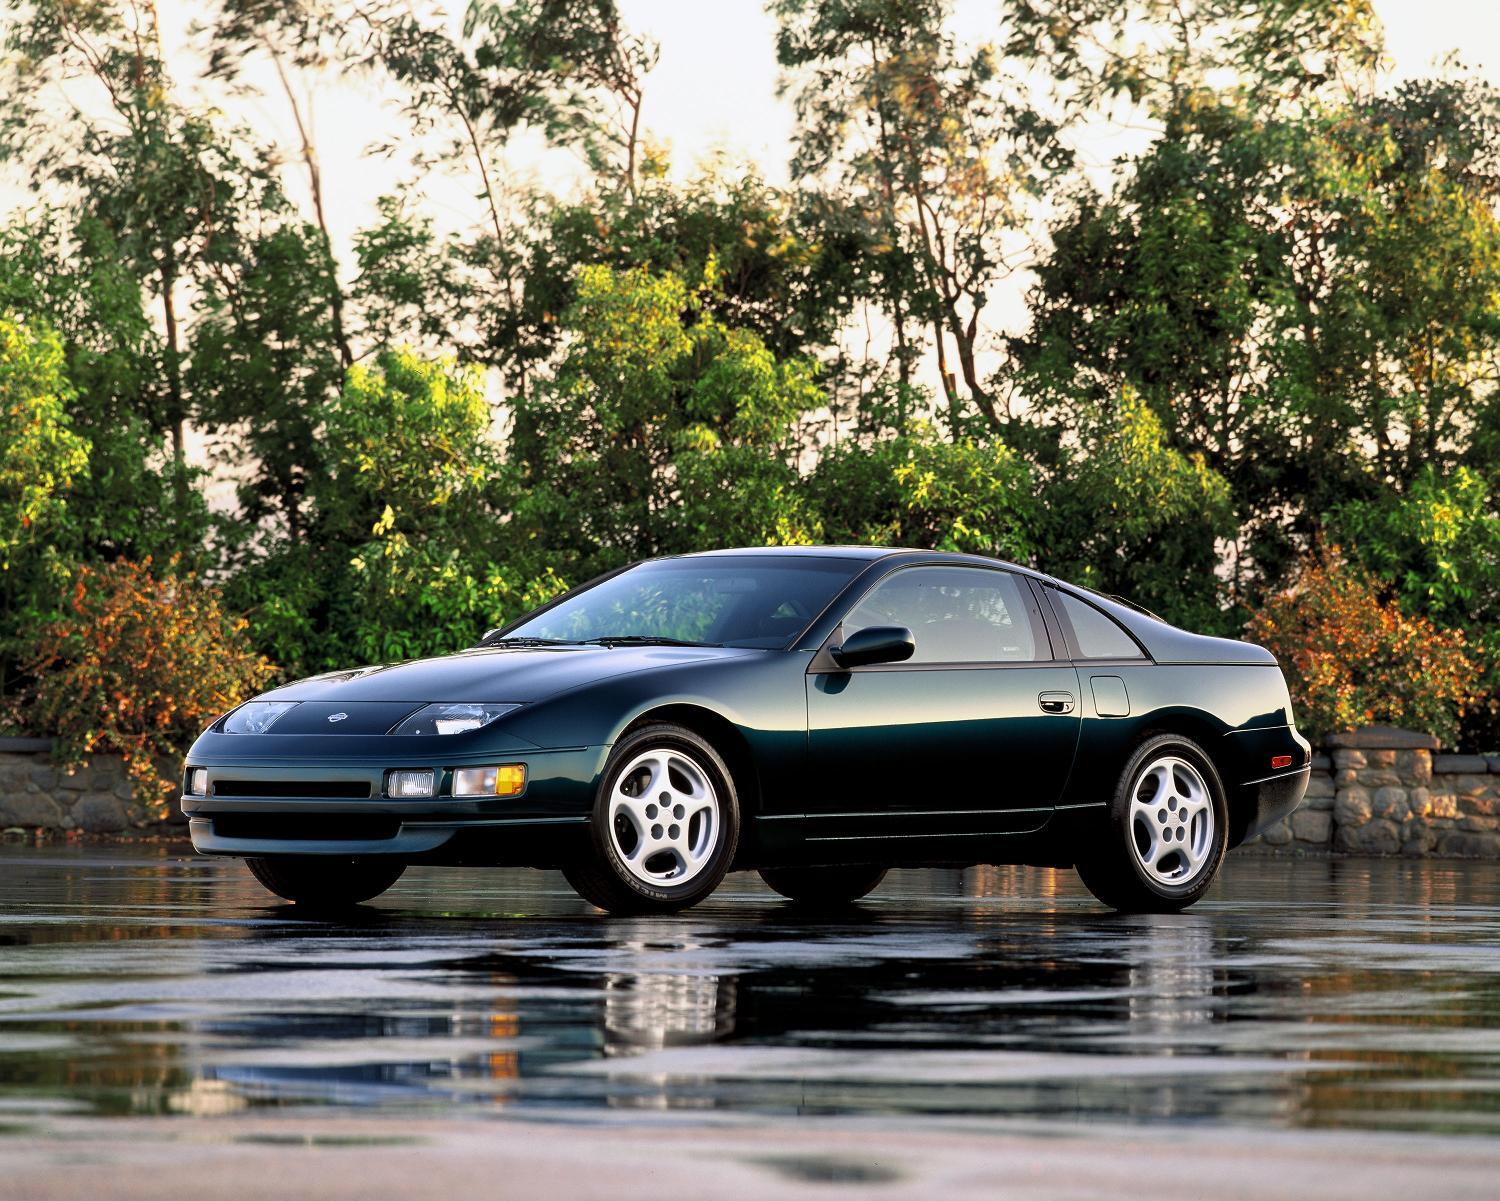 Black 1991 Nissan 300ZX in front of trees with wet road